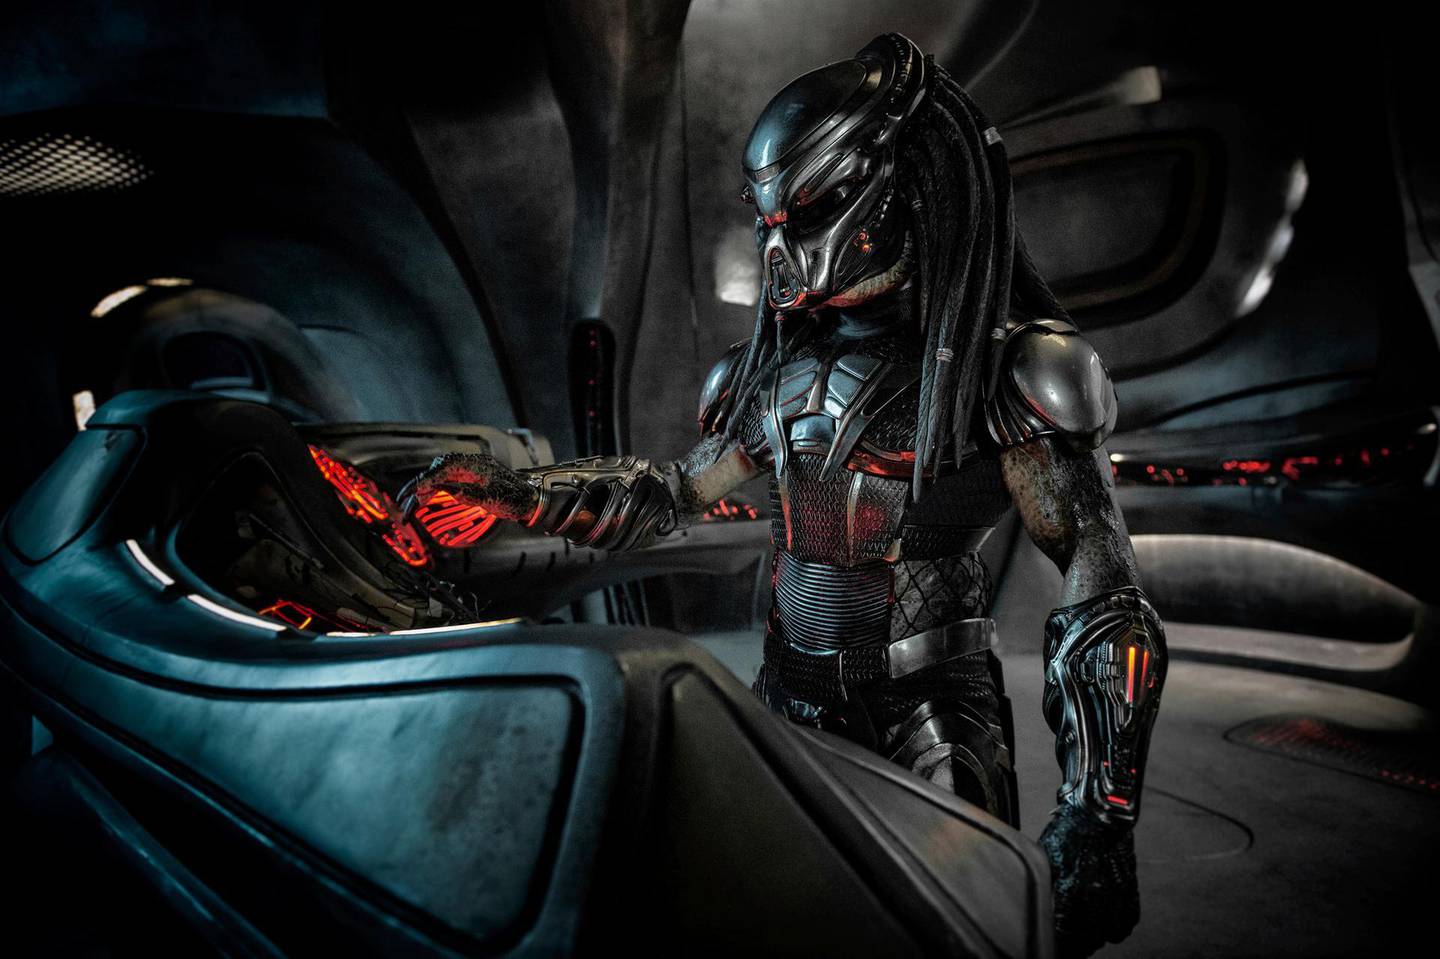 This image released by 20th Century Fox shows a scene from "The Predator." (Kimberley French/20th Century Fox via AP)